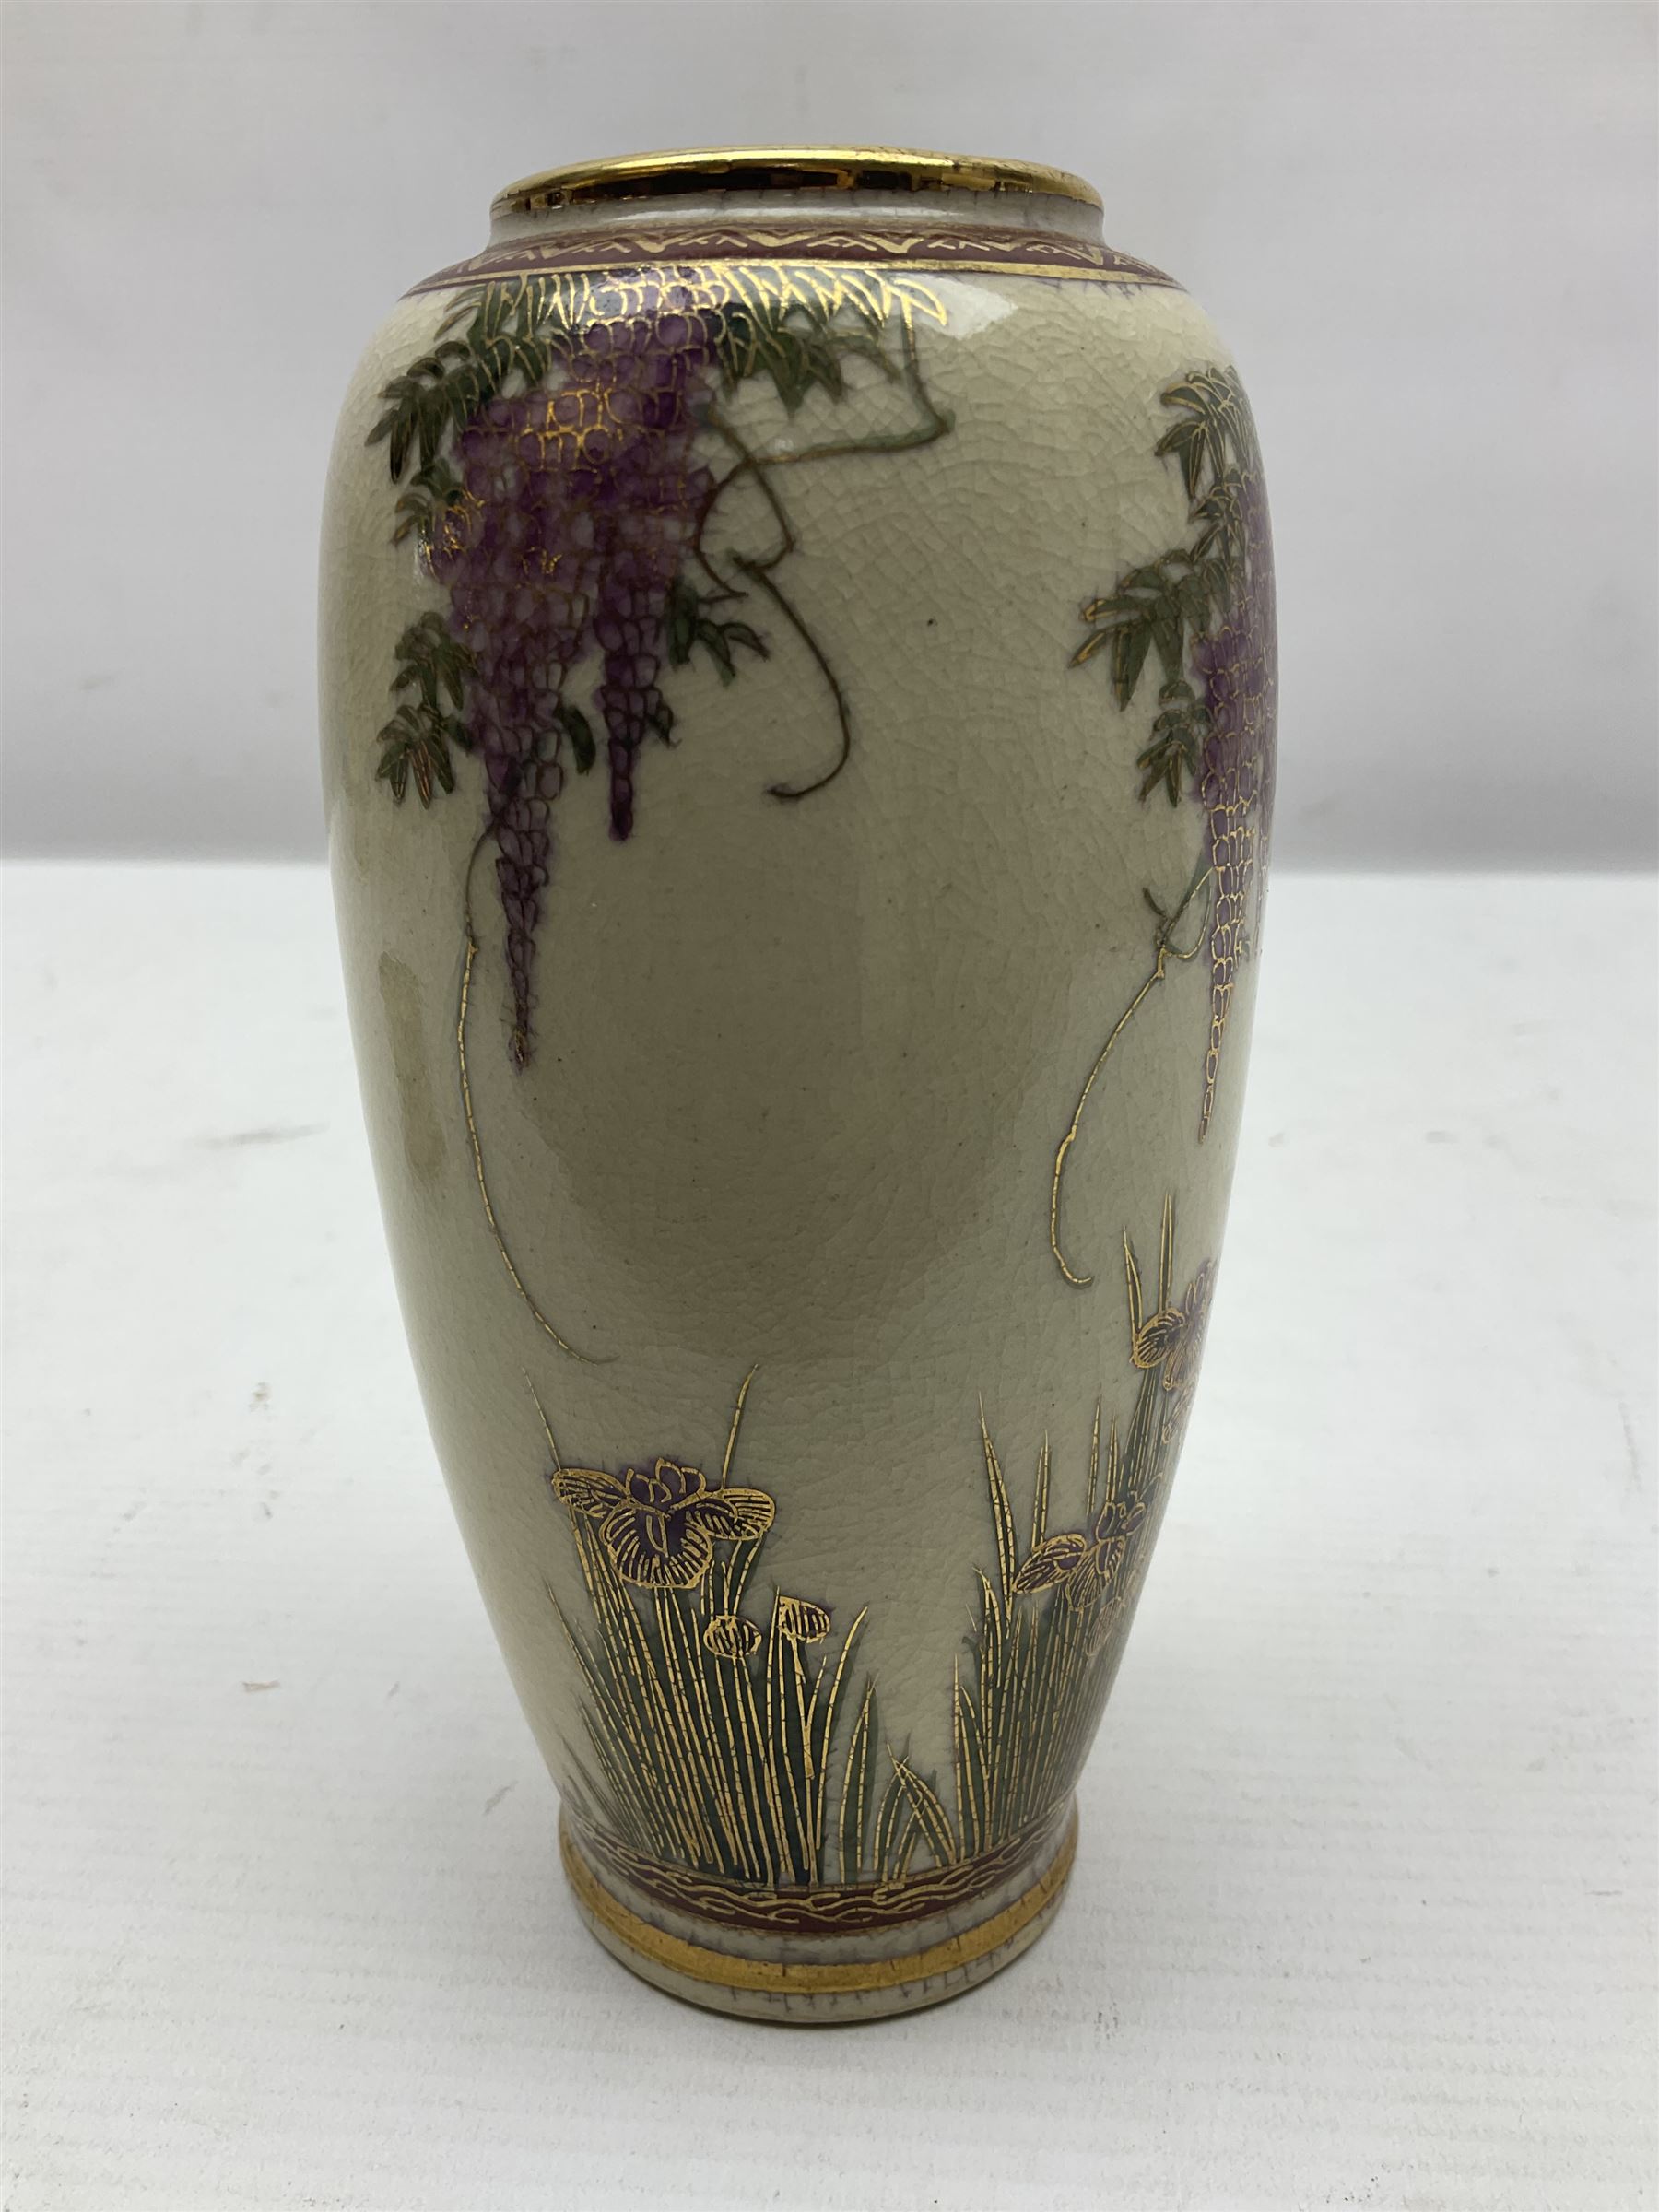 Japanese Satsuma Meiji period vase painted with a mountainous river landscape scene with wisteria an - Image 9 of 9